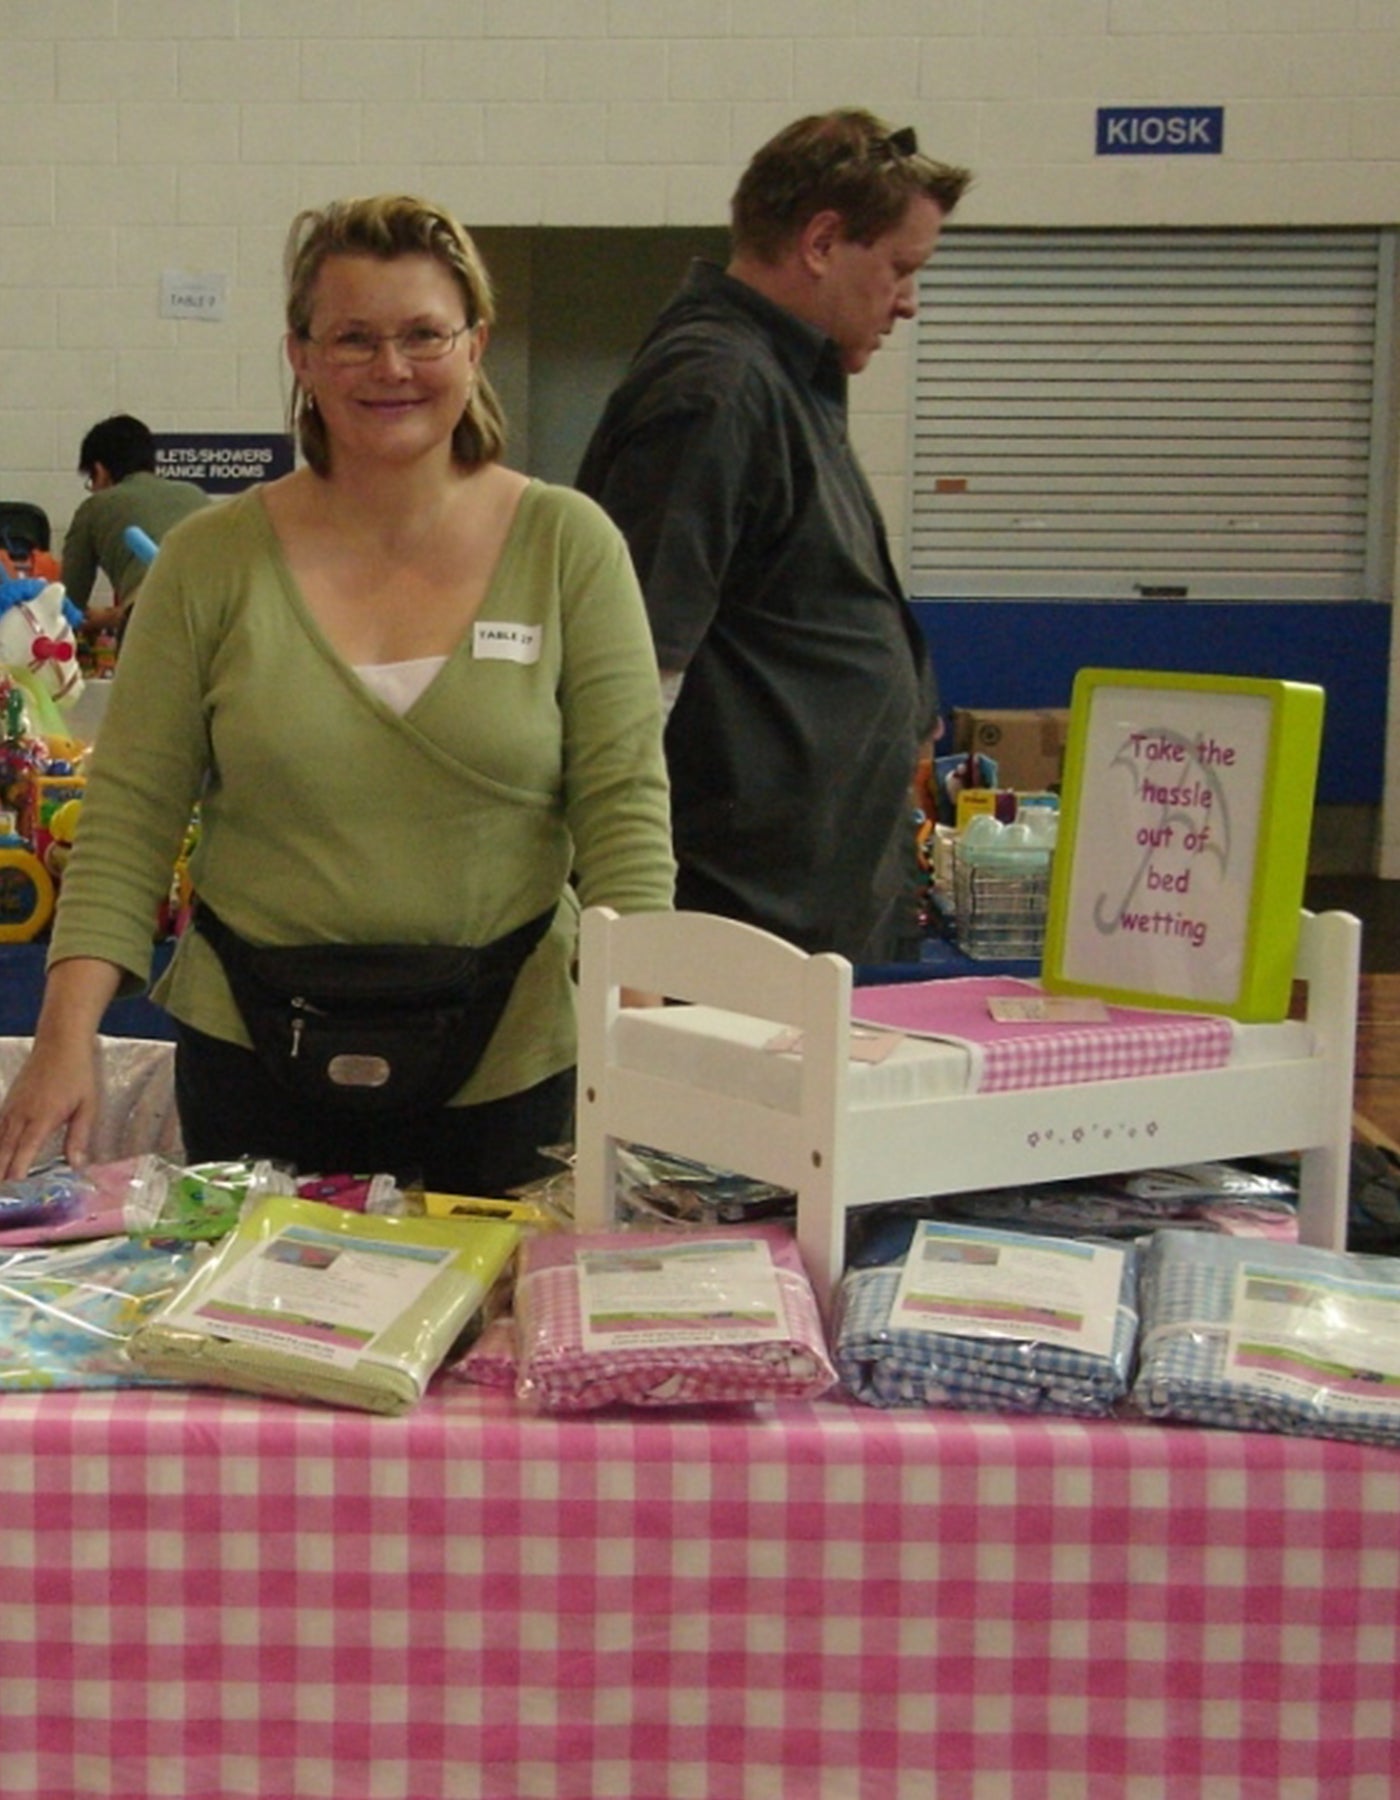 Diane standing in front of table with pink gingham table cloth.  on the table are several brolly sheets a and a scale model bed with scale model pink brolly sheets.  the sign says take the hassle out of bed wetting.